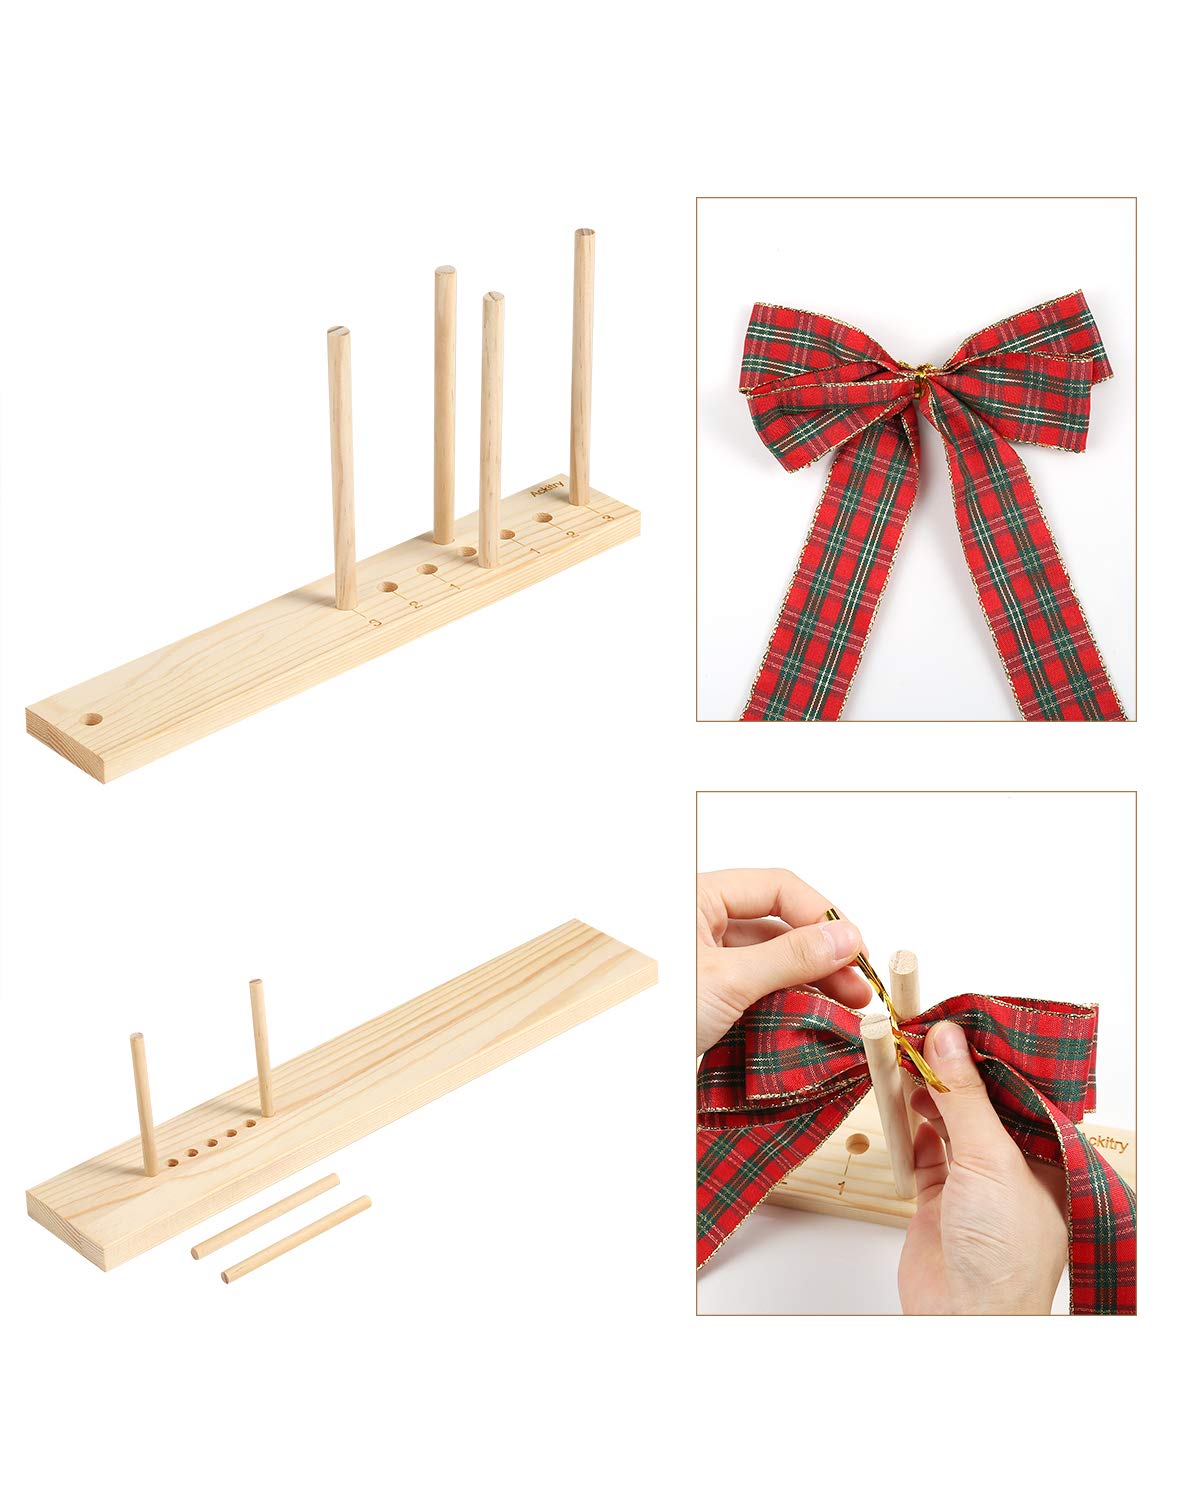 Ackitry X-Large Bow Maker for Ribbon for Wreaths, 20 Inch Wooden Bow Maker  Tool for Christmas Halloween Bows, Hair Bows, Creating Gift Bow, Party